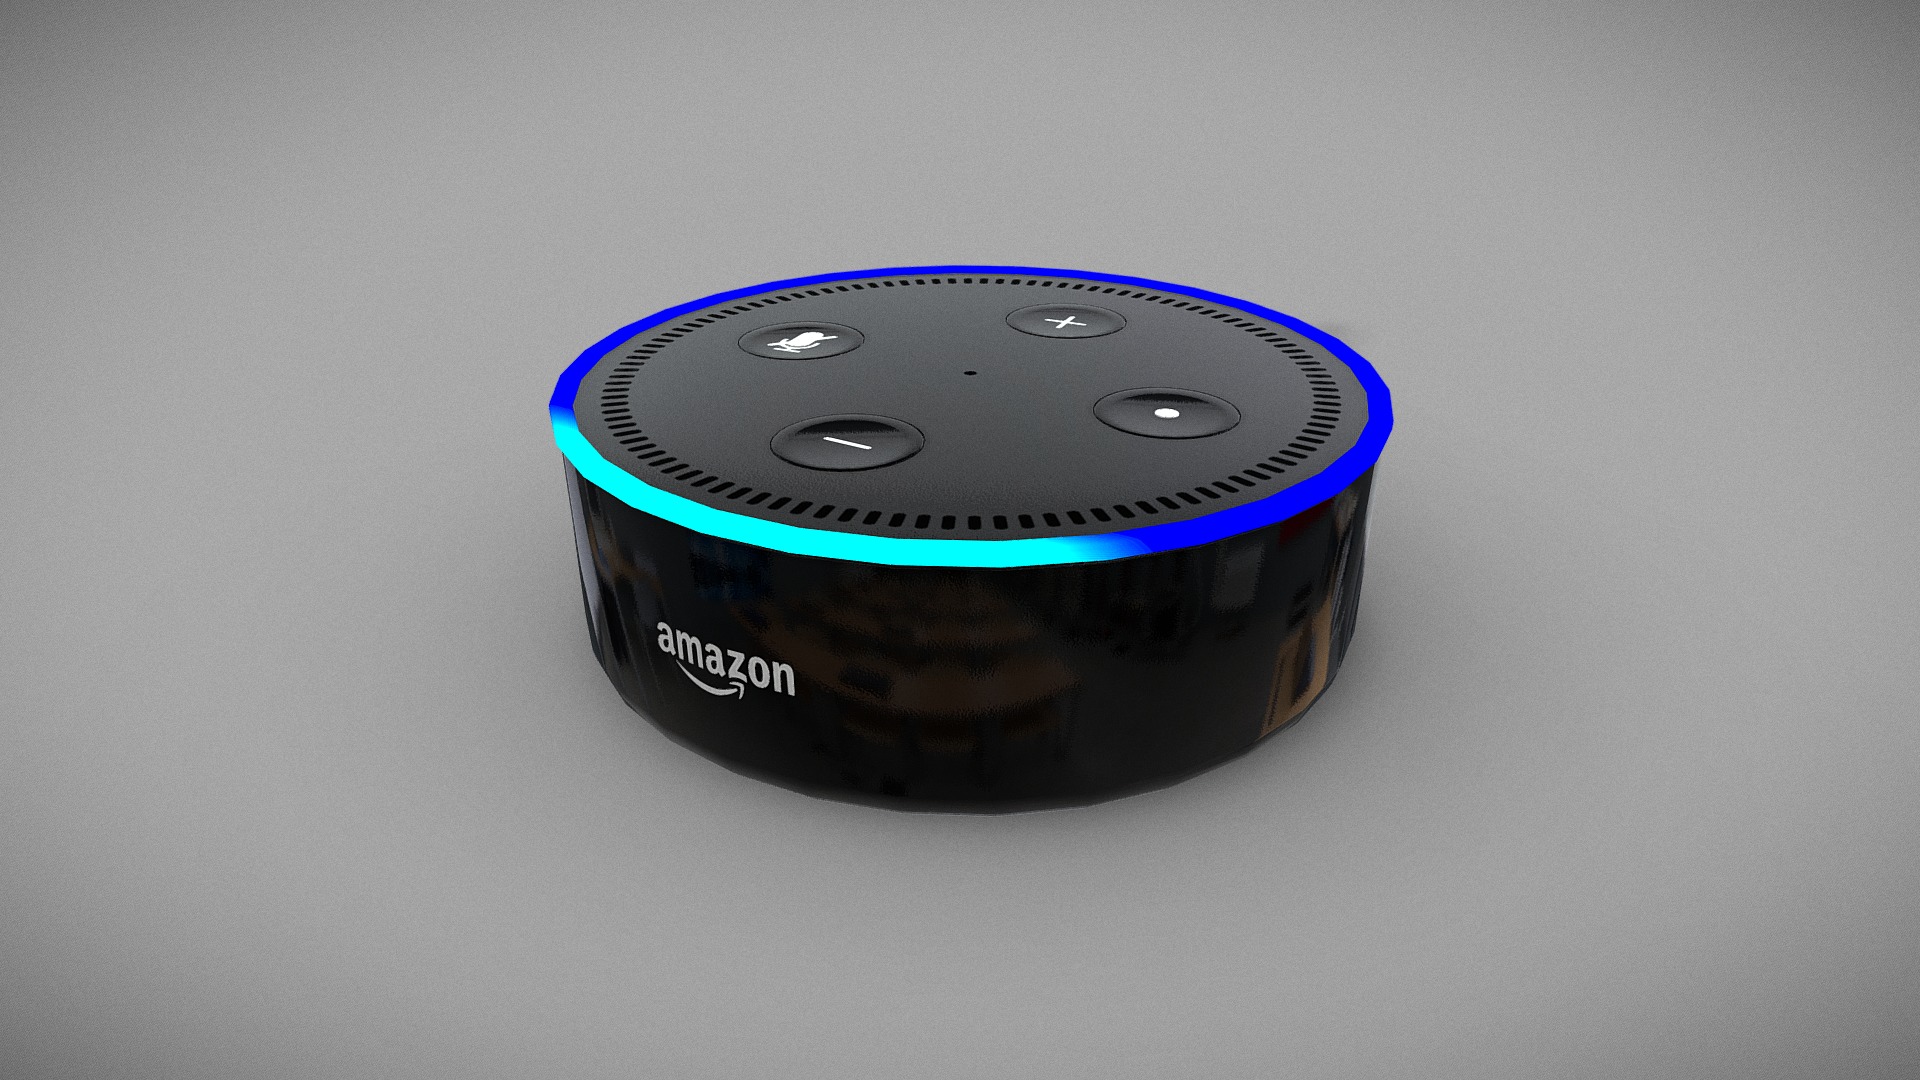 3D model Amazon Echo Dot (2nd Generation) - This is a 3D model of the Amazon Echo Dot (2nd Generation). The 3D model is about a blue and black circular object.